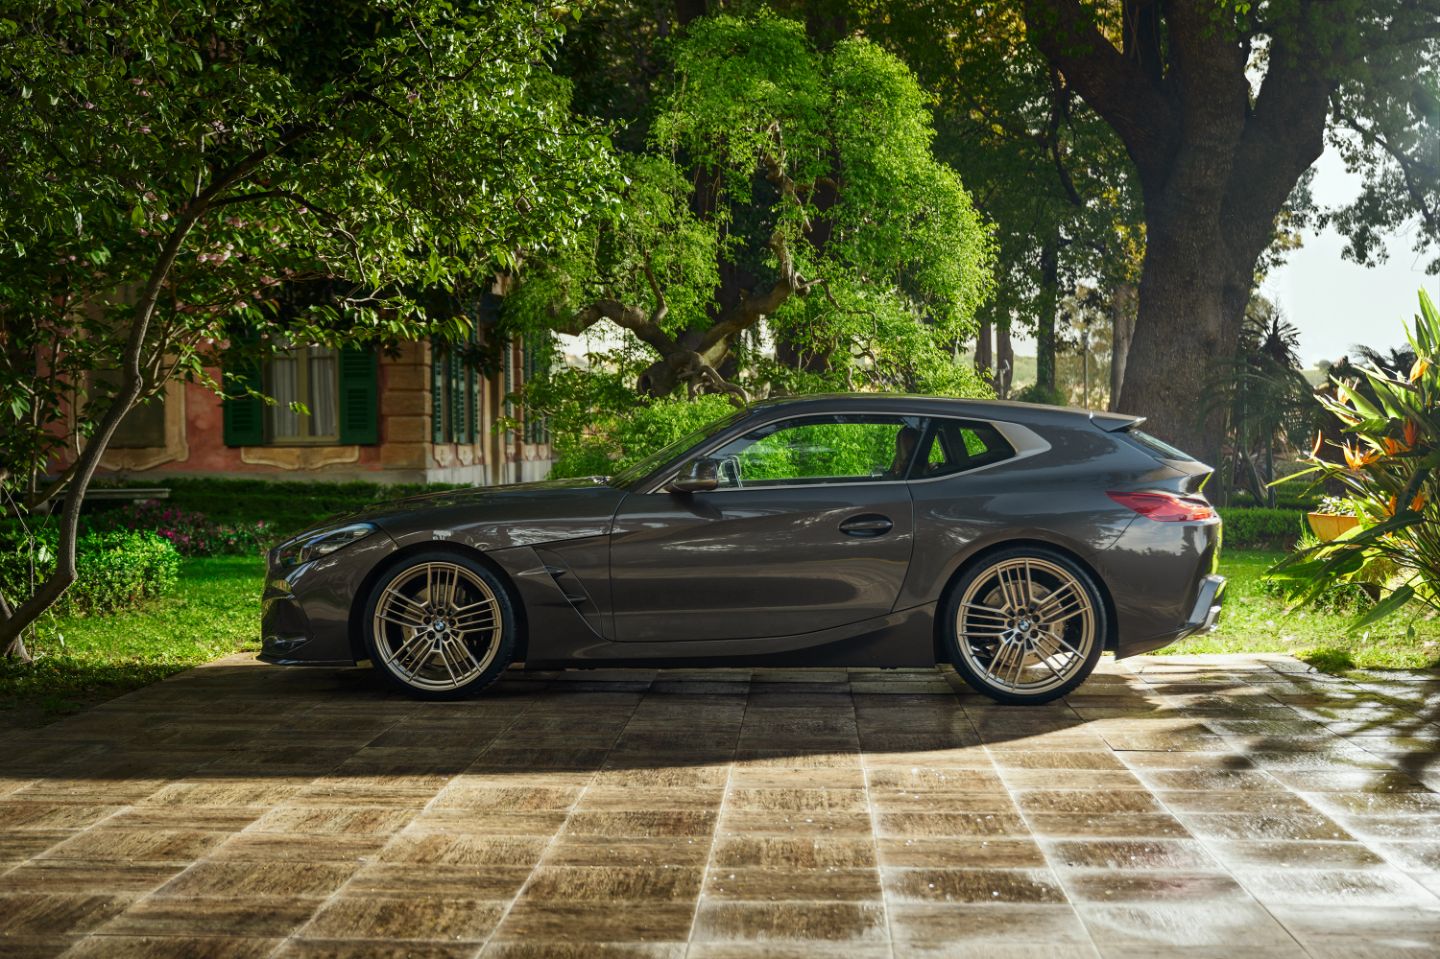 The BMW Concept Touring Coupé represents a dynamic contemporary take on a body shape steeped in tradition. 